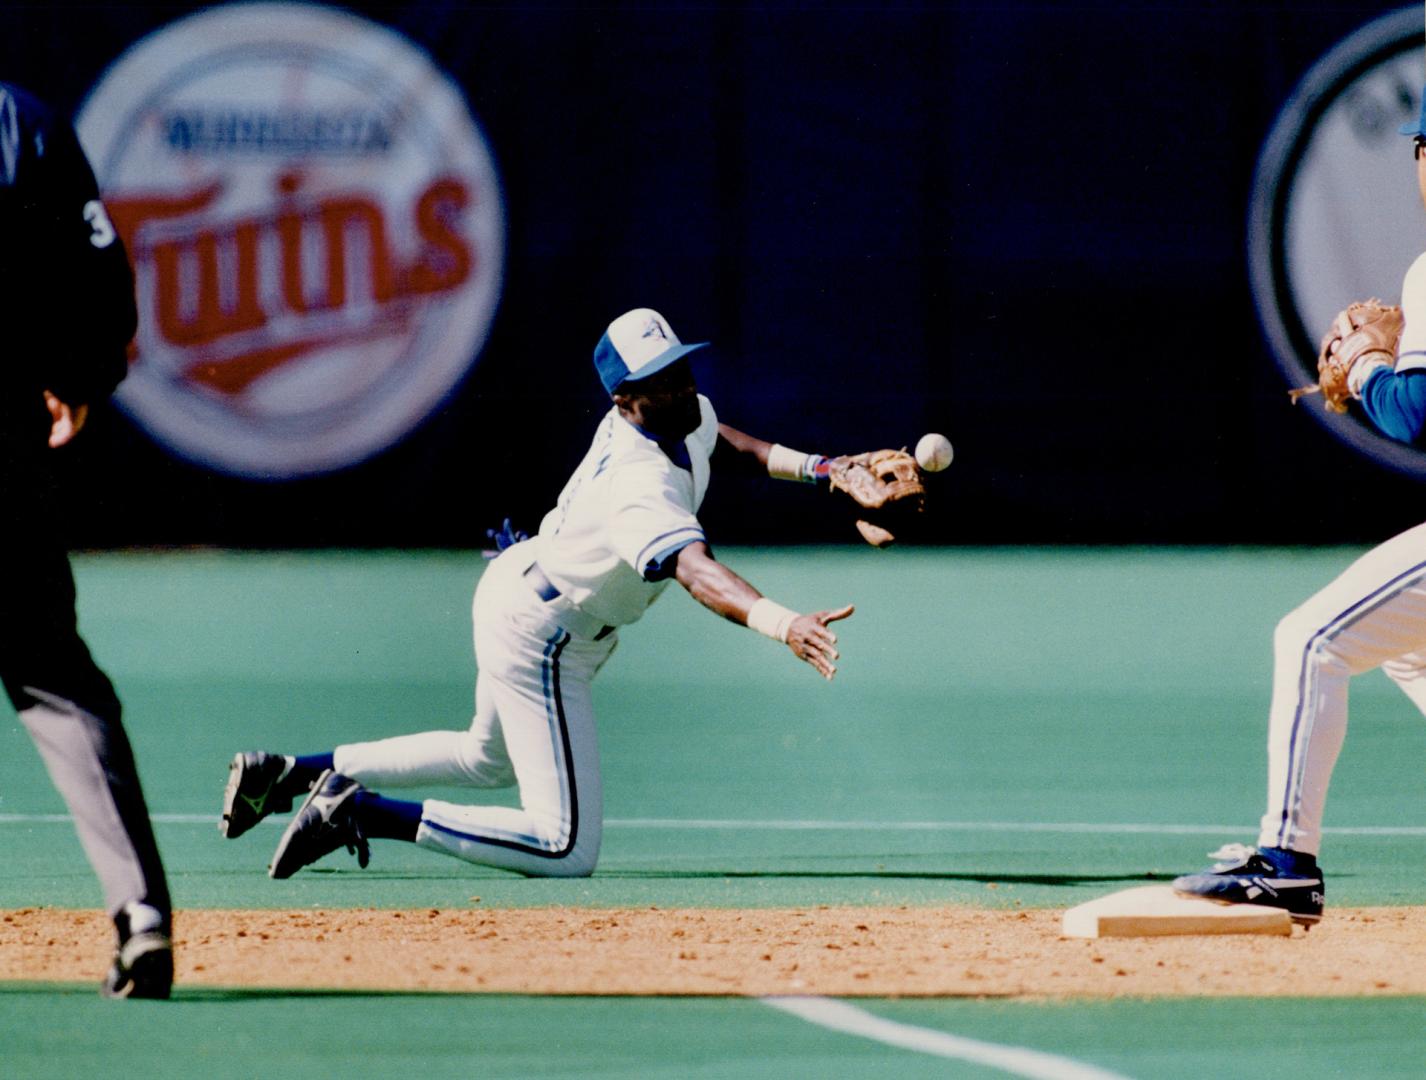 Call it two: Alfredo Griffin snares a hot smash up the middle and shuffles the ball to Roberto Alomar, who avoids Ranger Dan Peltier to turn a double play yesterday